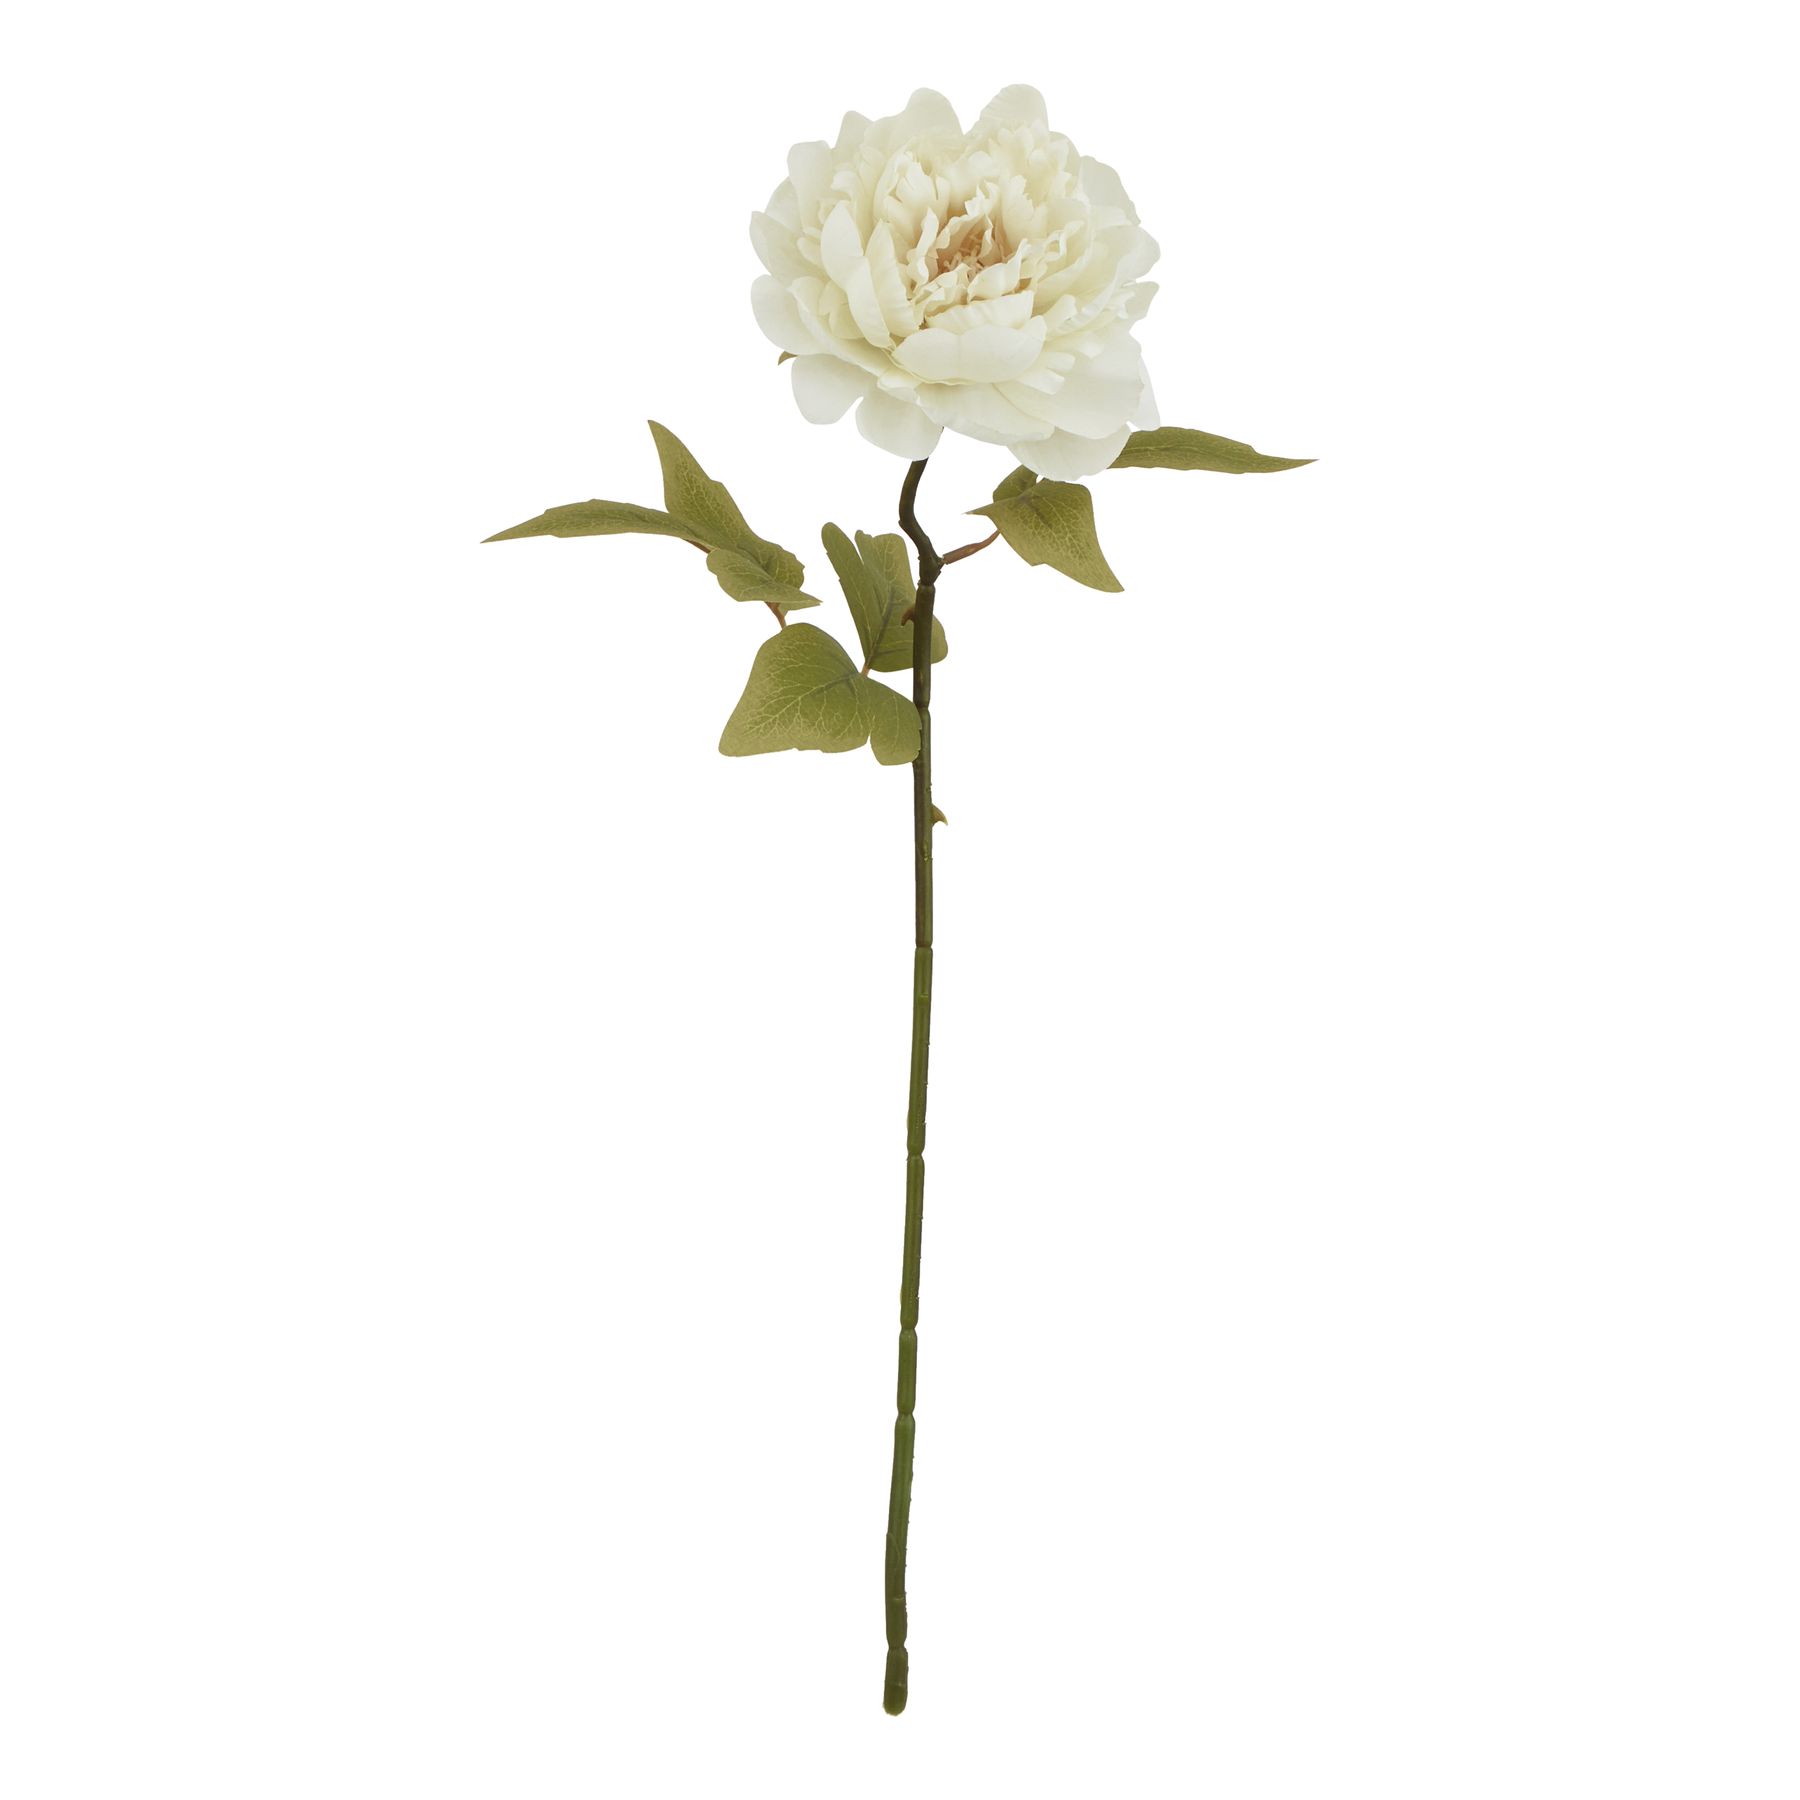 The Natural Garden Collection White Peony - Image 1